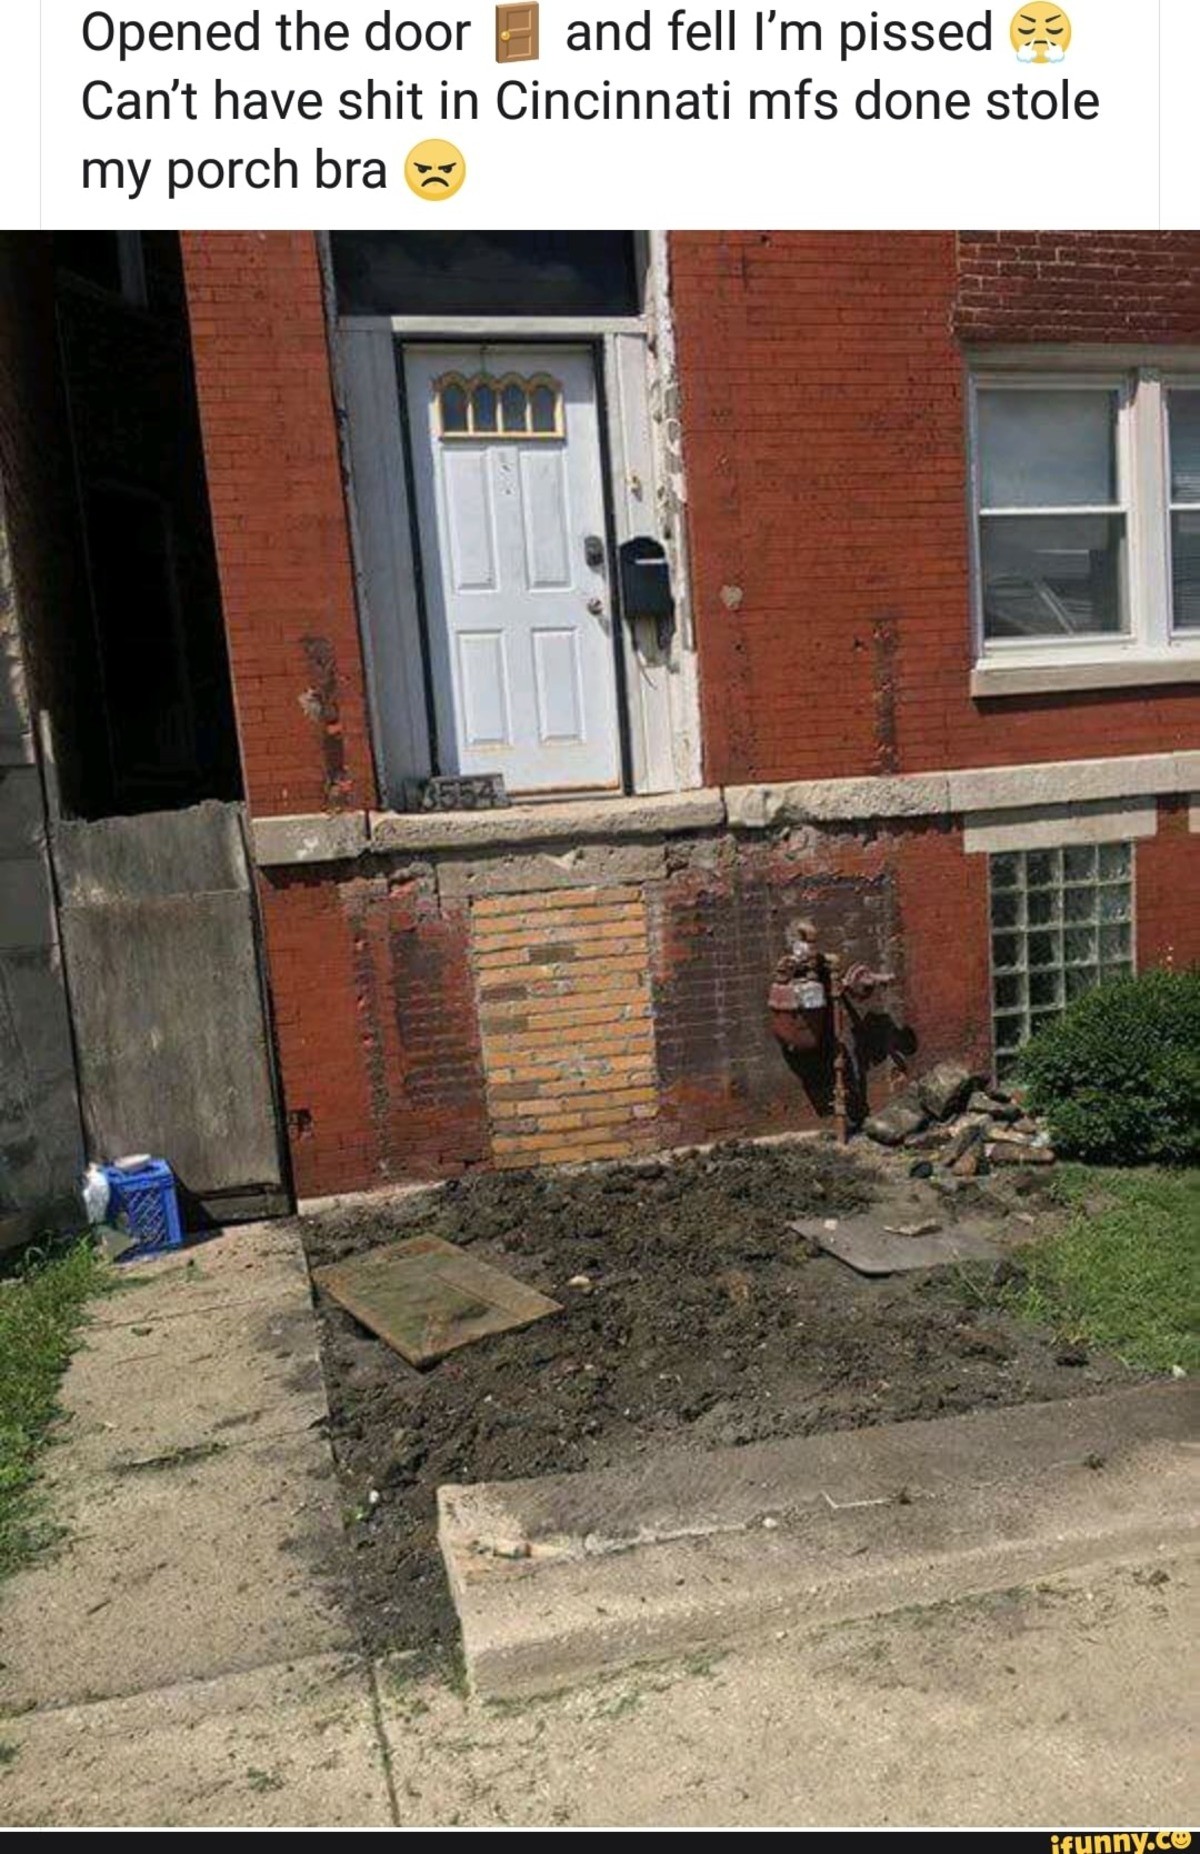 How. . Opened the door and fell I' m pisse FE Can' t have shit in Cincinnati mfs done stole my porch bra 2:. I just a repost of this but it said Detroit....so I have a reason to beleive this complete . Also working in construction I know that the wood used in that porc